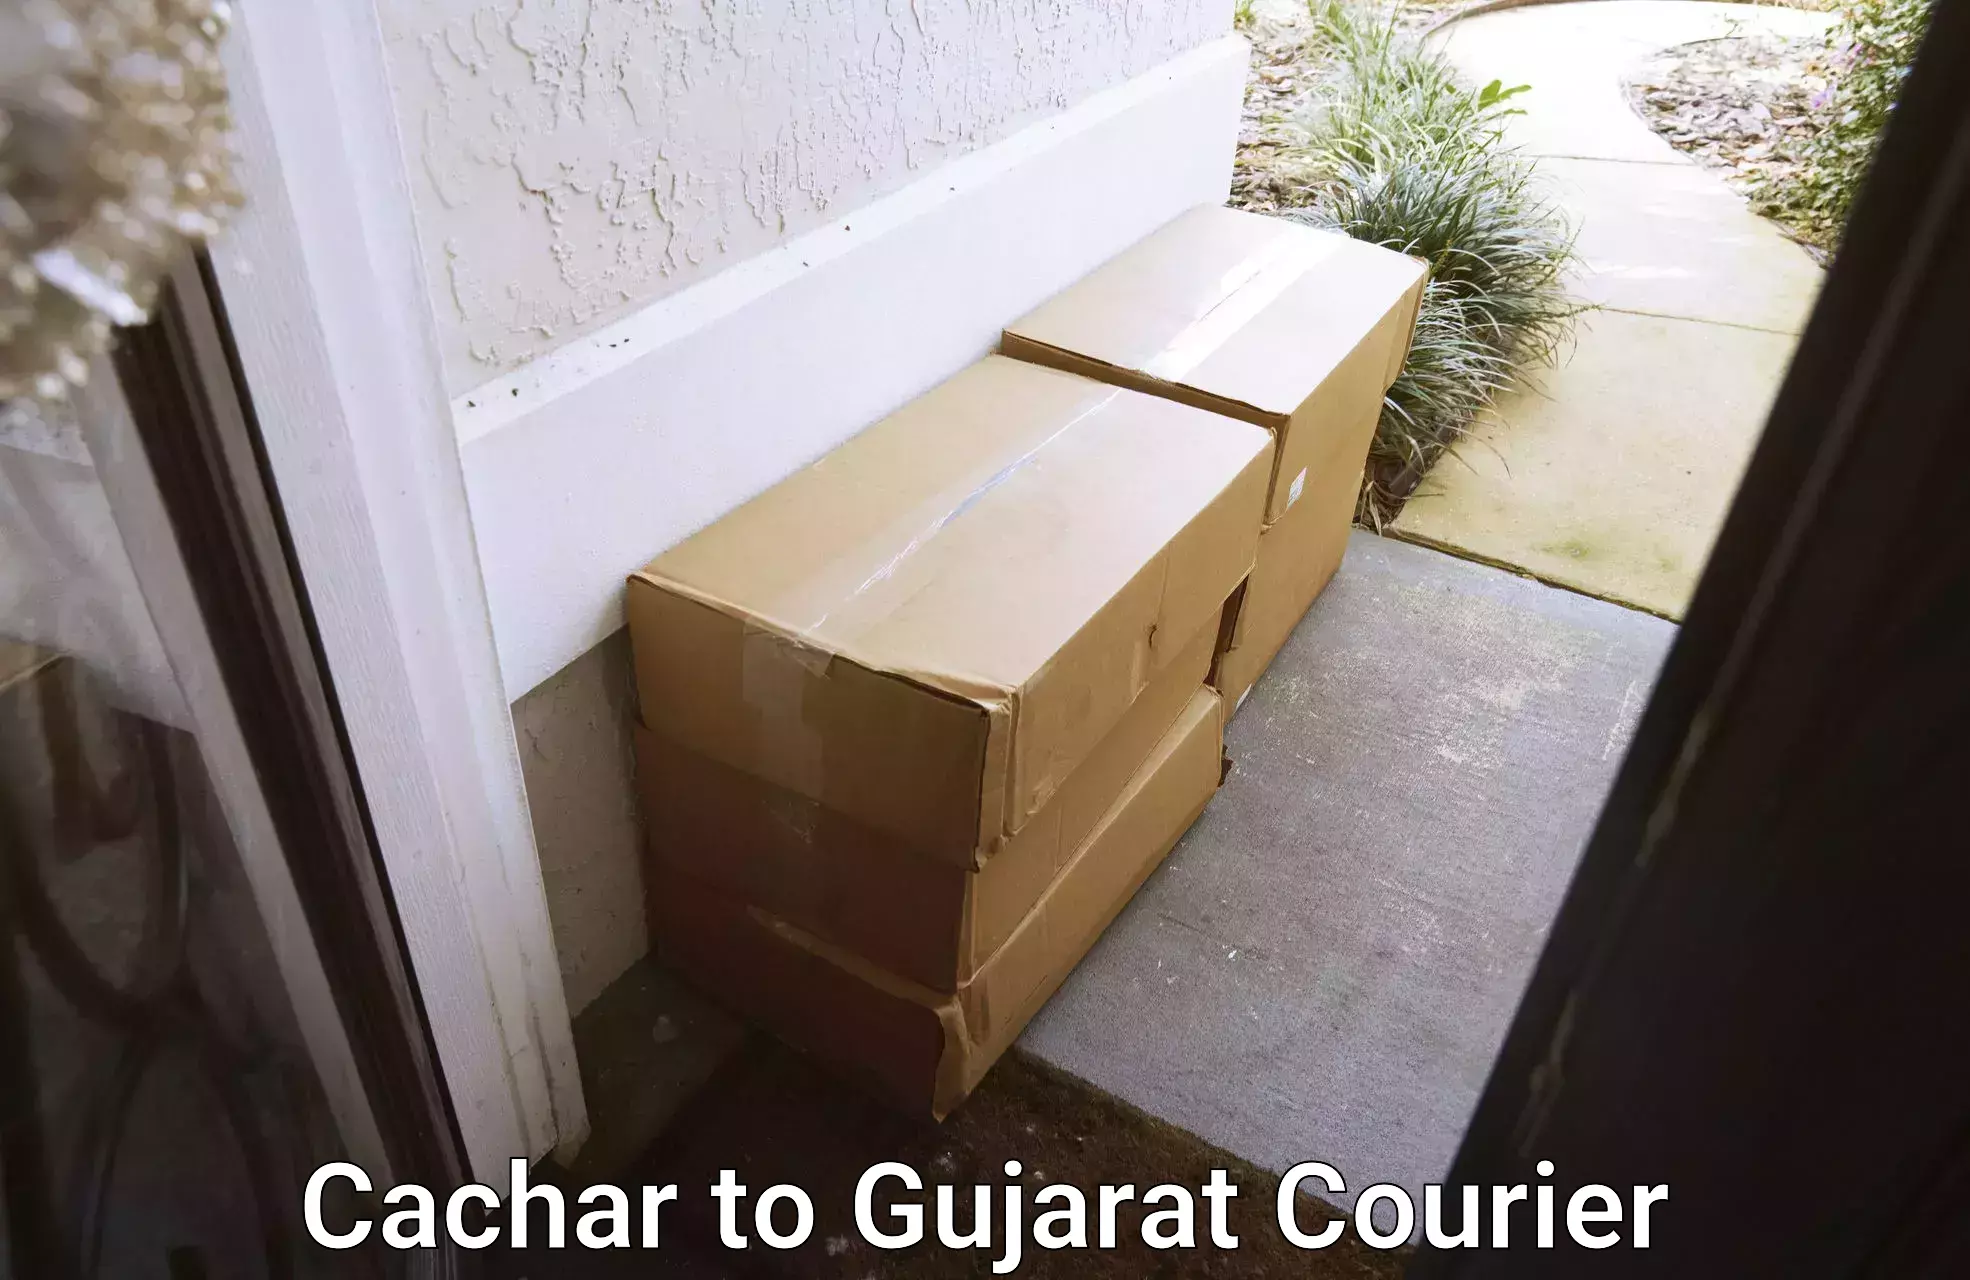 Fast delivery service Cachar to Gujarat